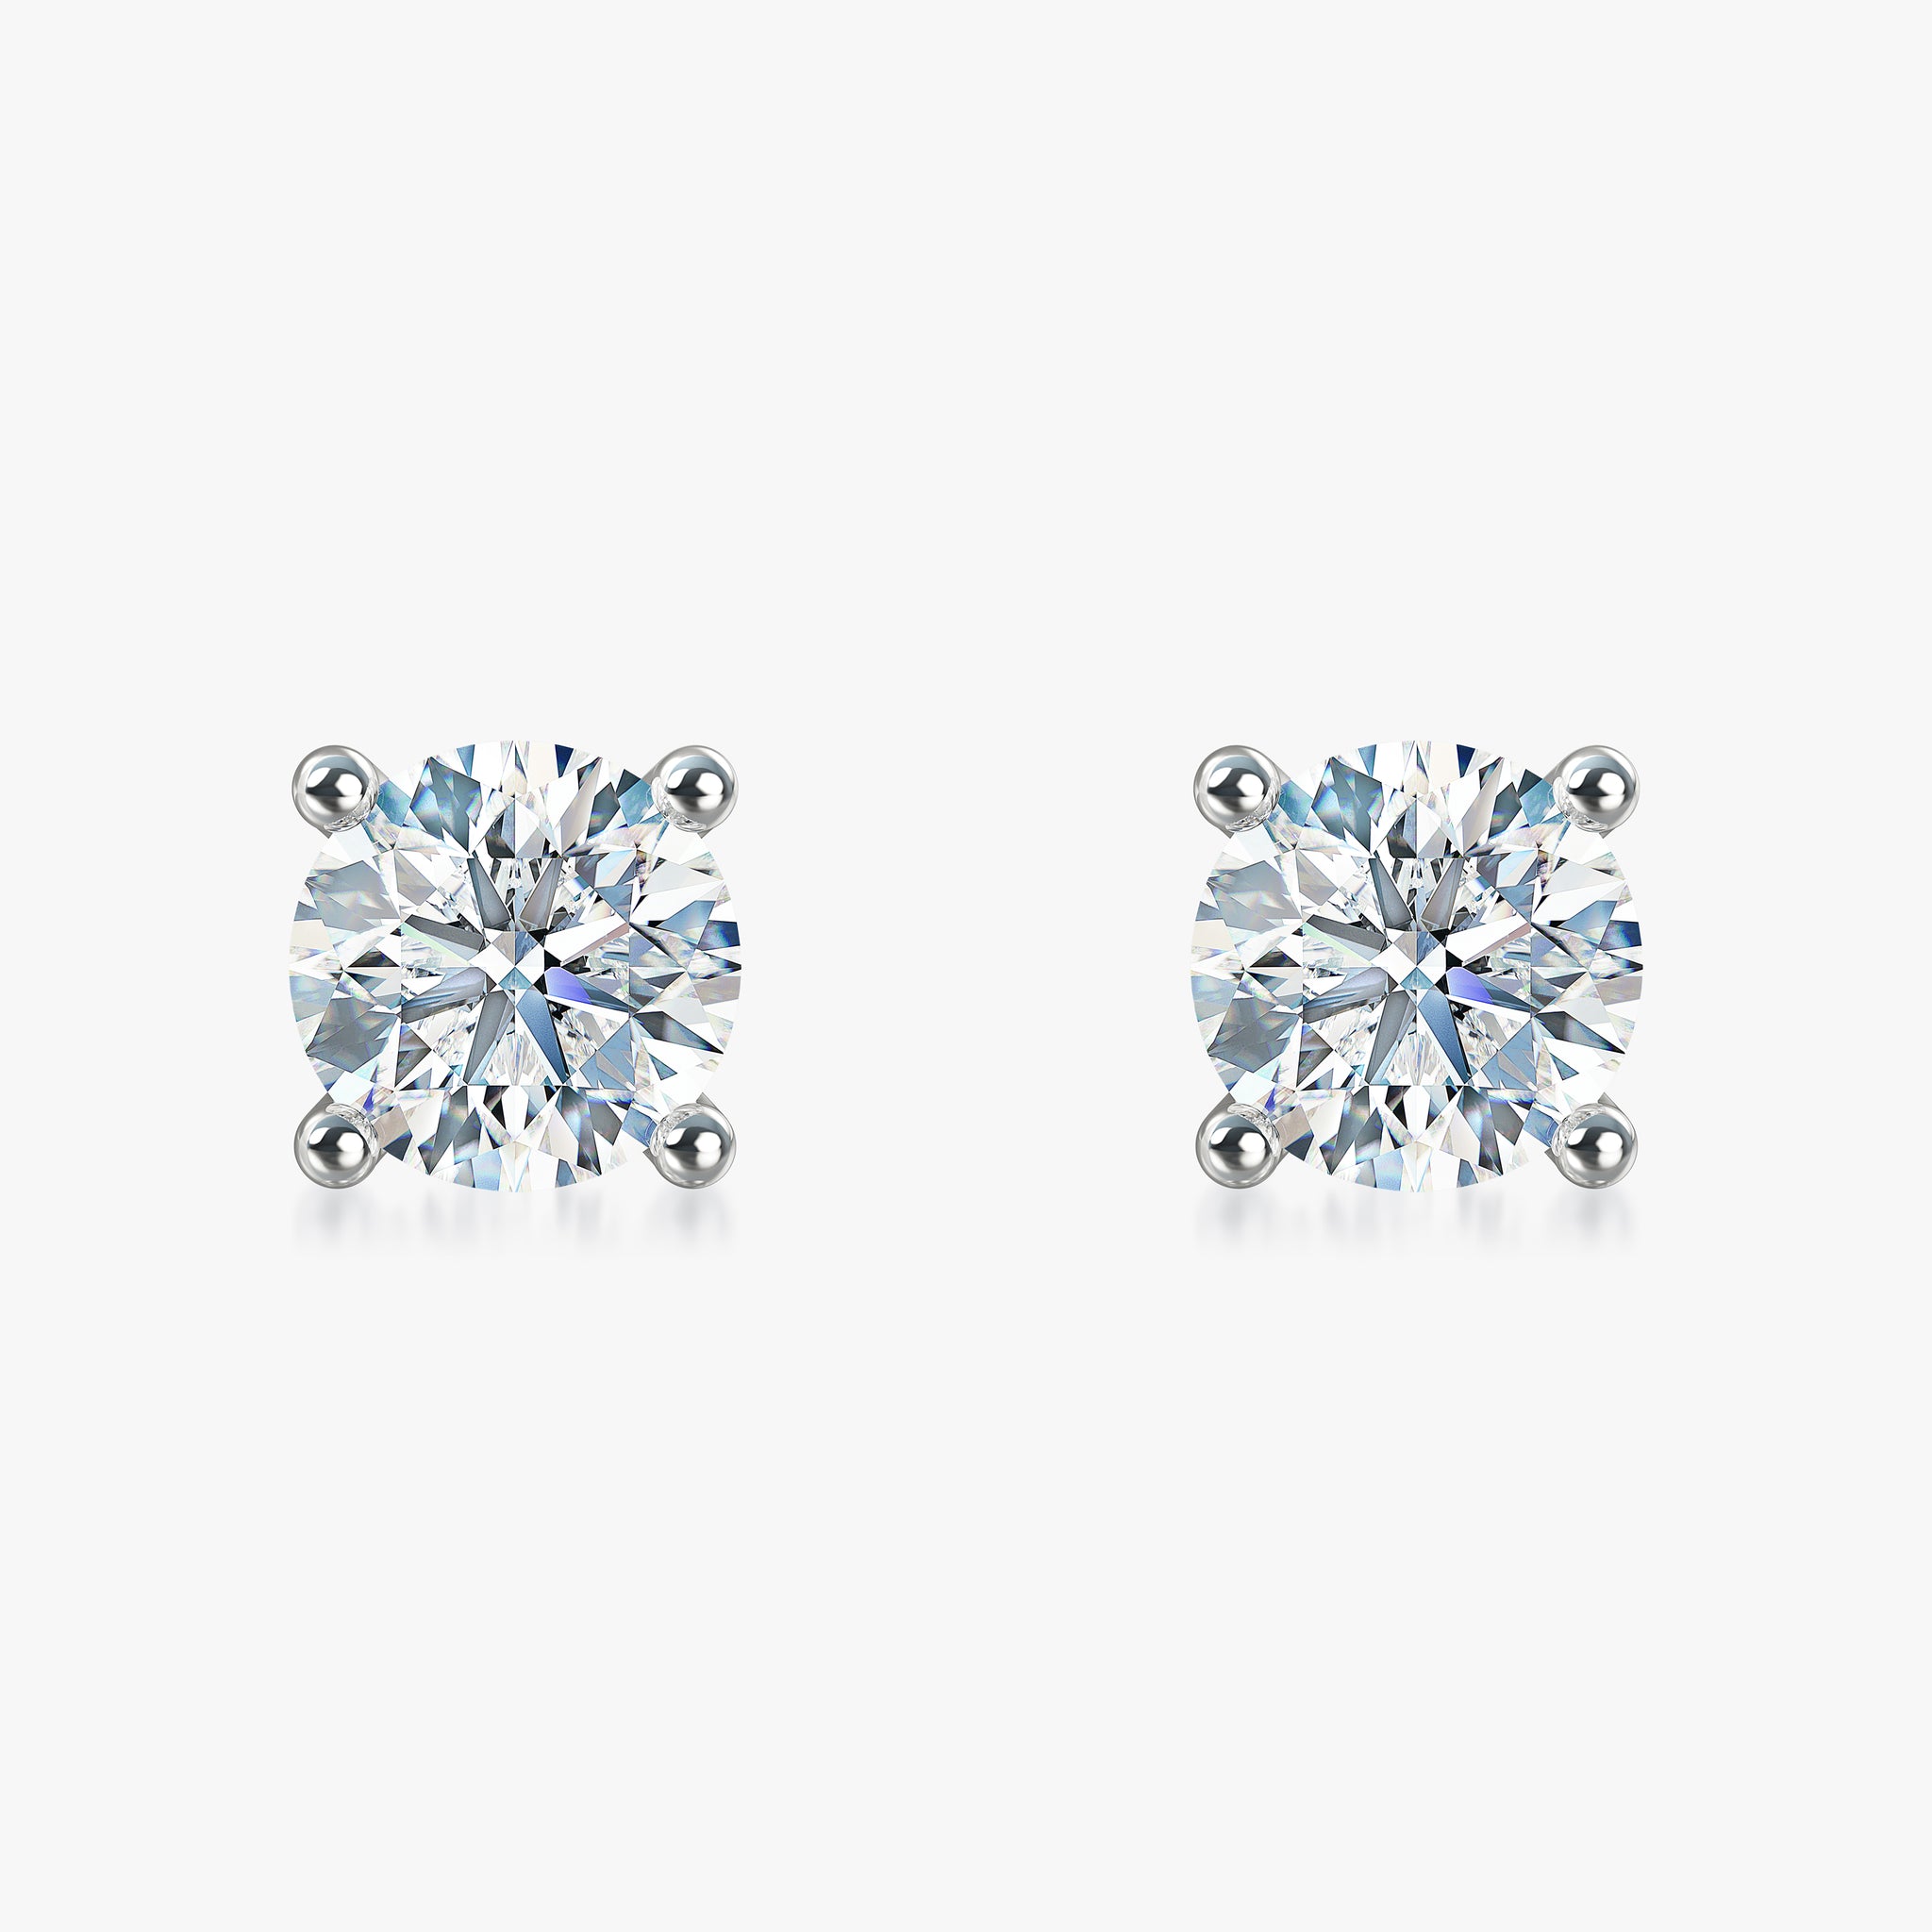 J'EVAR 18KT White Gold ALTR Lab Grown Diamond Stud Earrings with Guardian Backs Front View